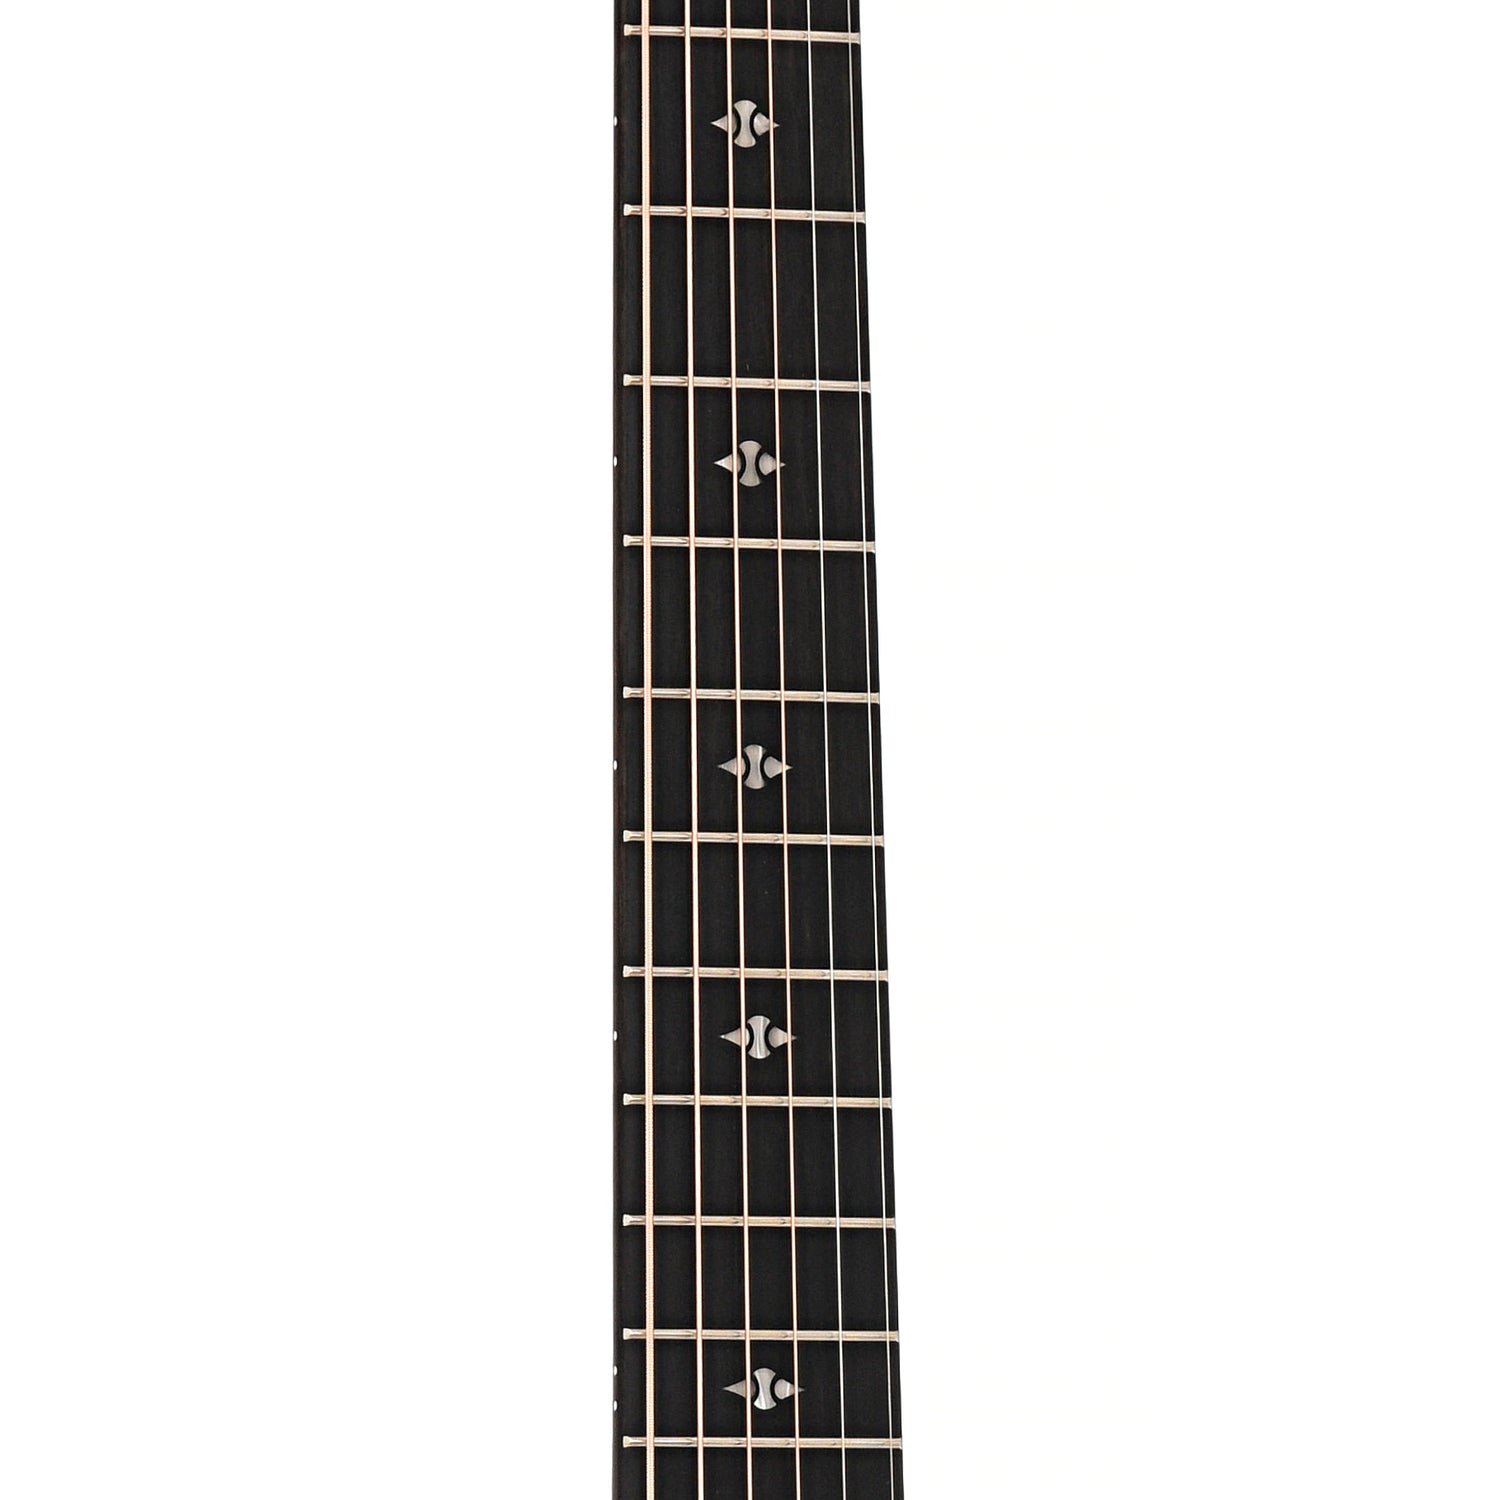 Fretboard of Taylor Builder's Edition 324ce Acoustic